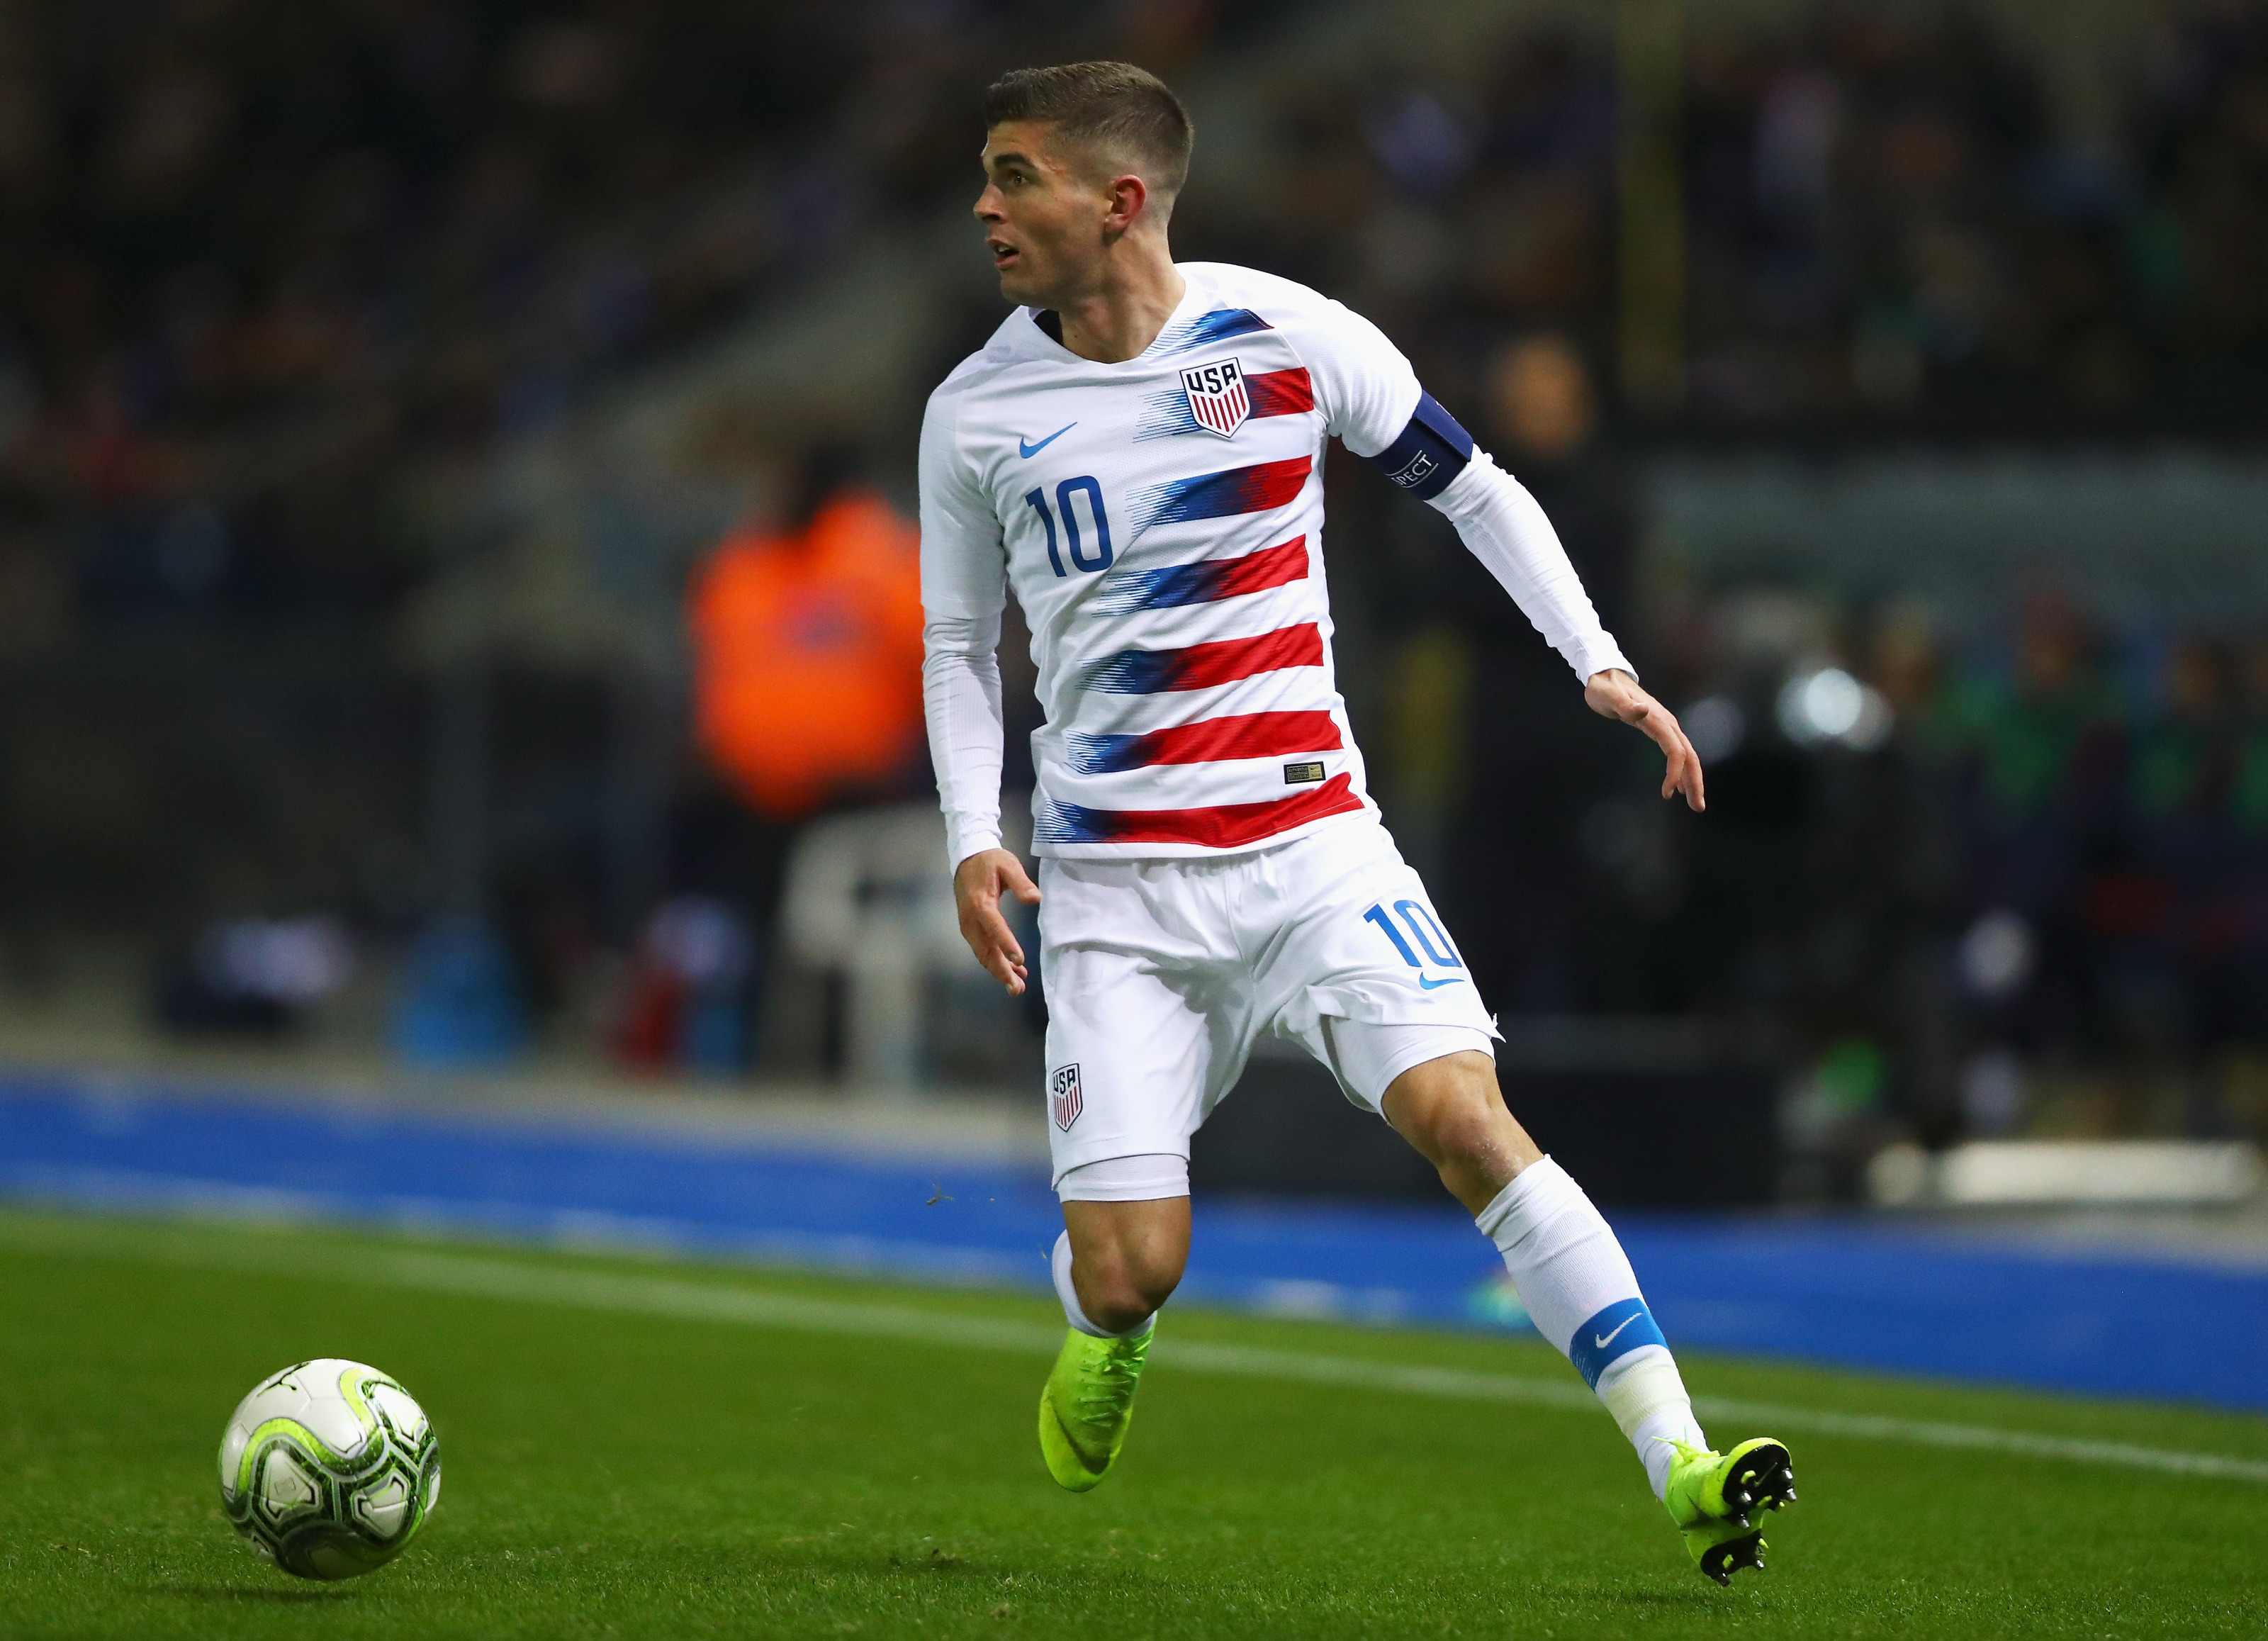 USA coach delivers Christian Pulisic injury update » Chelsea News